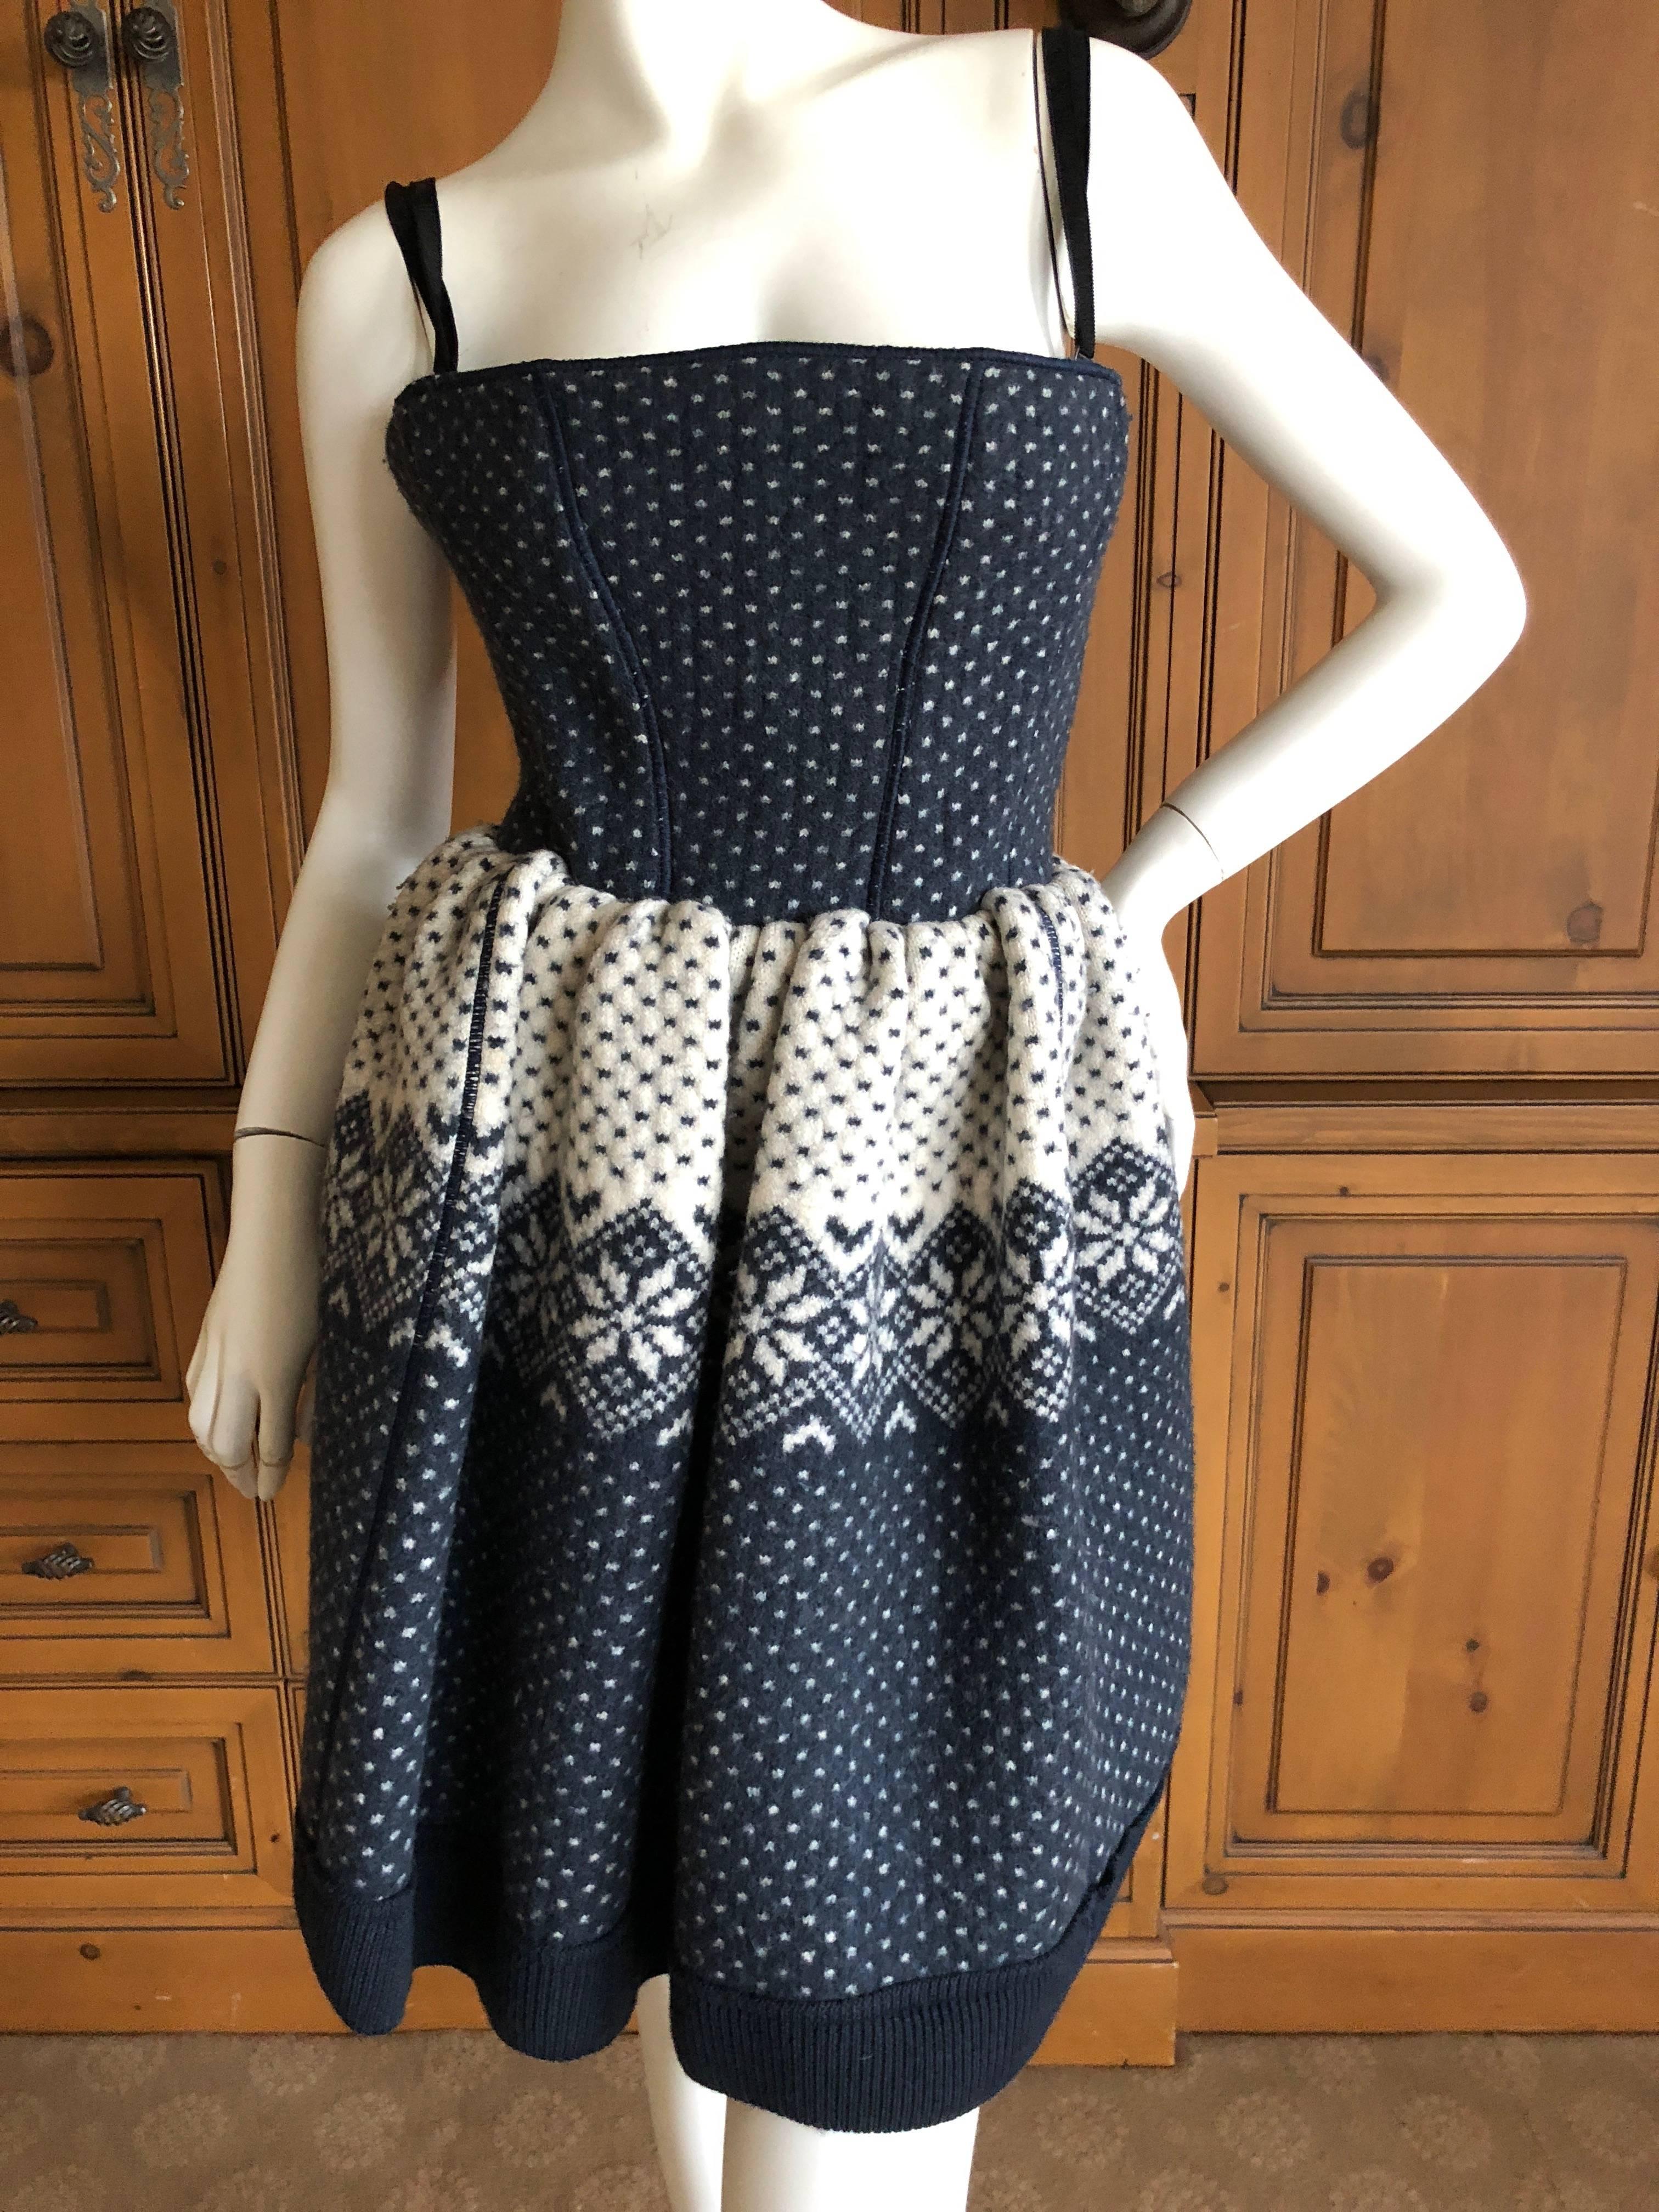   D&G by Dolce & Gabbana Fair Isle Knit Mini Dress with Built In Corset In Excellent Condition For Sale In Cloverdale, CA